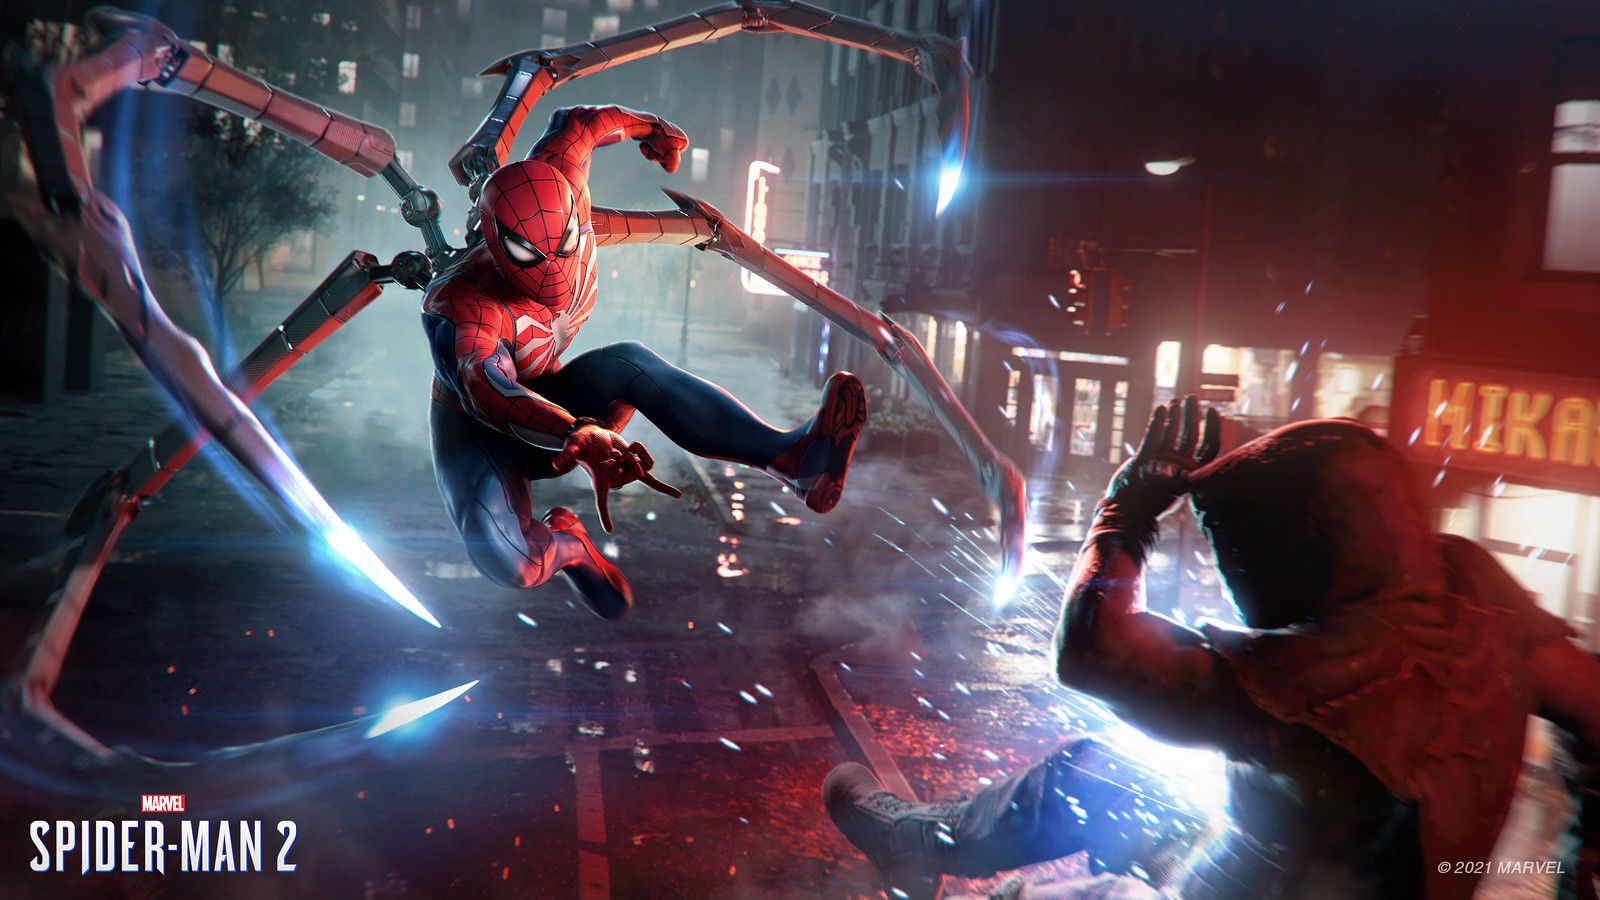 Spider-Man 2 Swings into Action: A 'Marvelous' Triumph by Insomniac Games